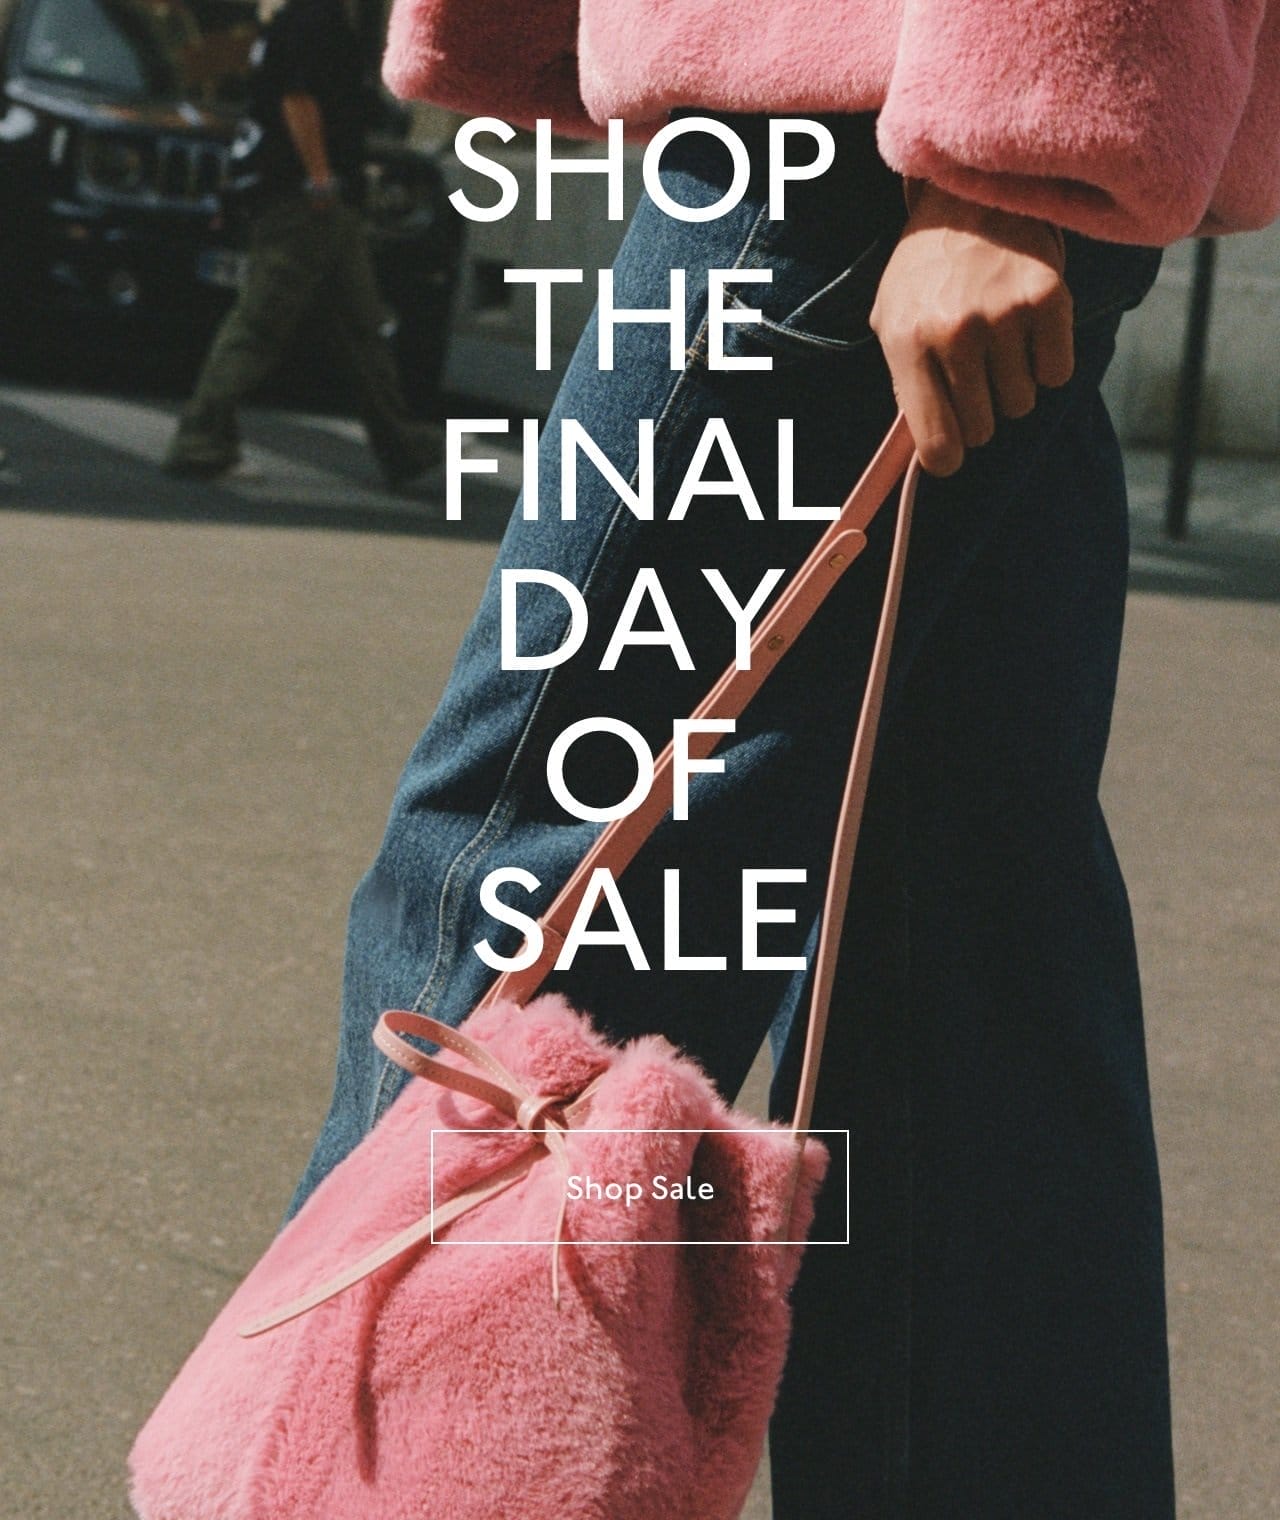 Shop the final day of sale now.